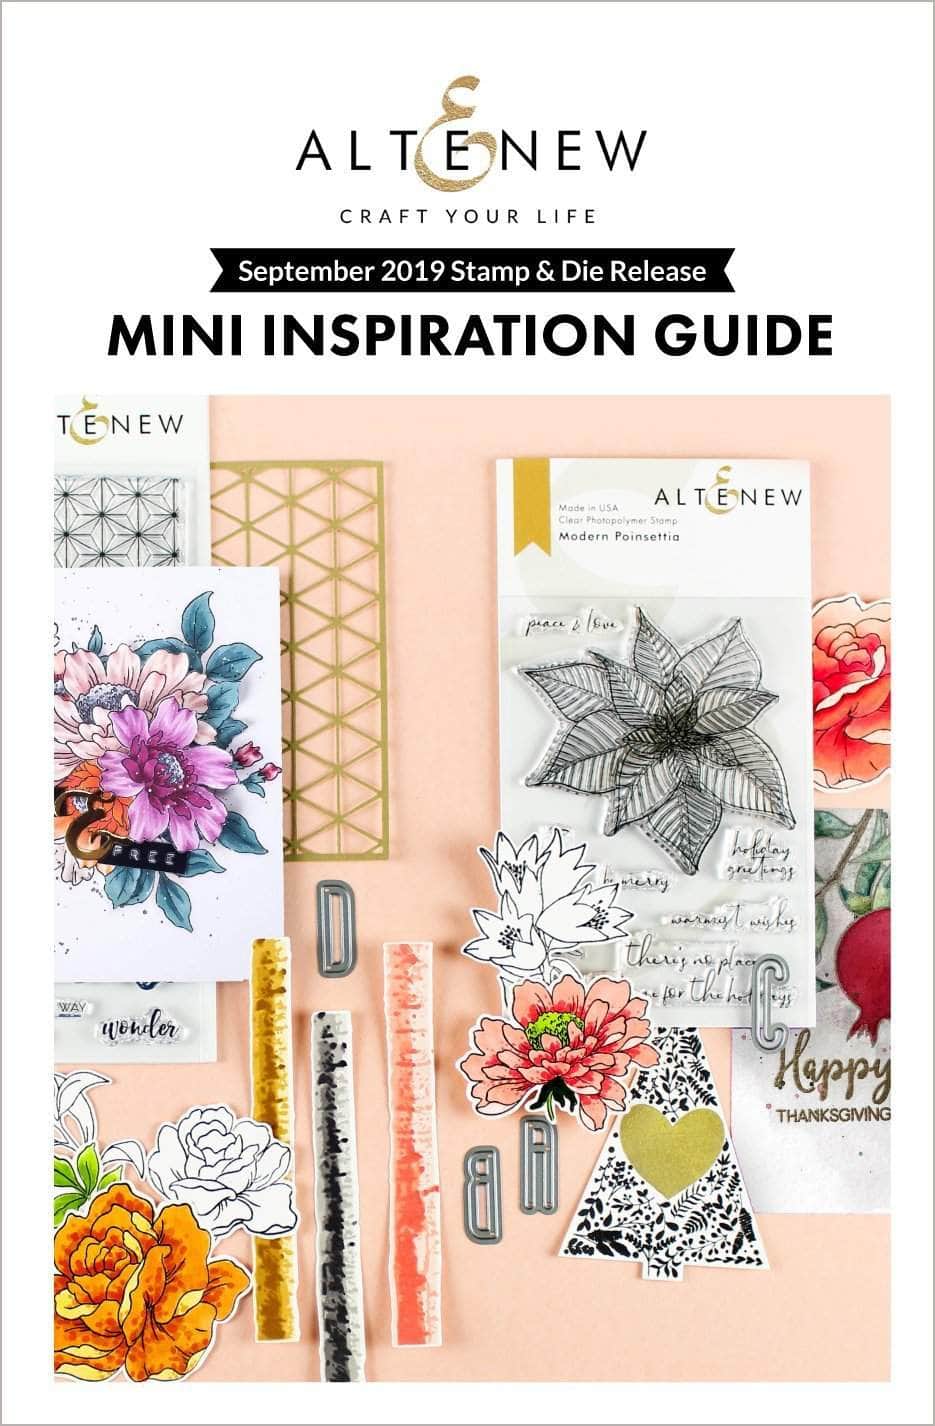 55Printing.com Printed Media Holiday Friendship Stamp & Die Release Mini Inspiration Guide